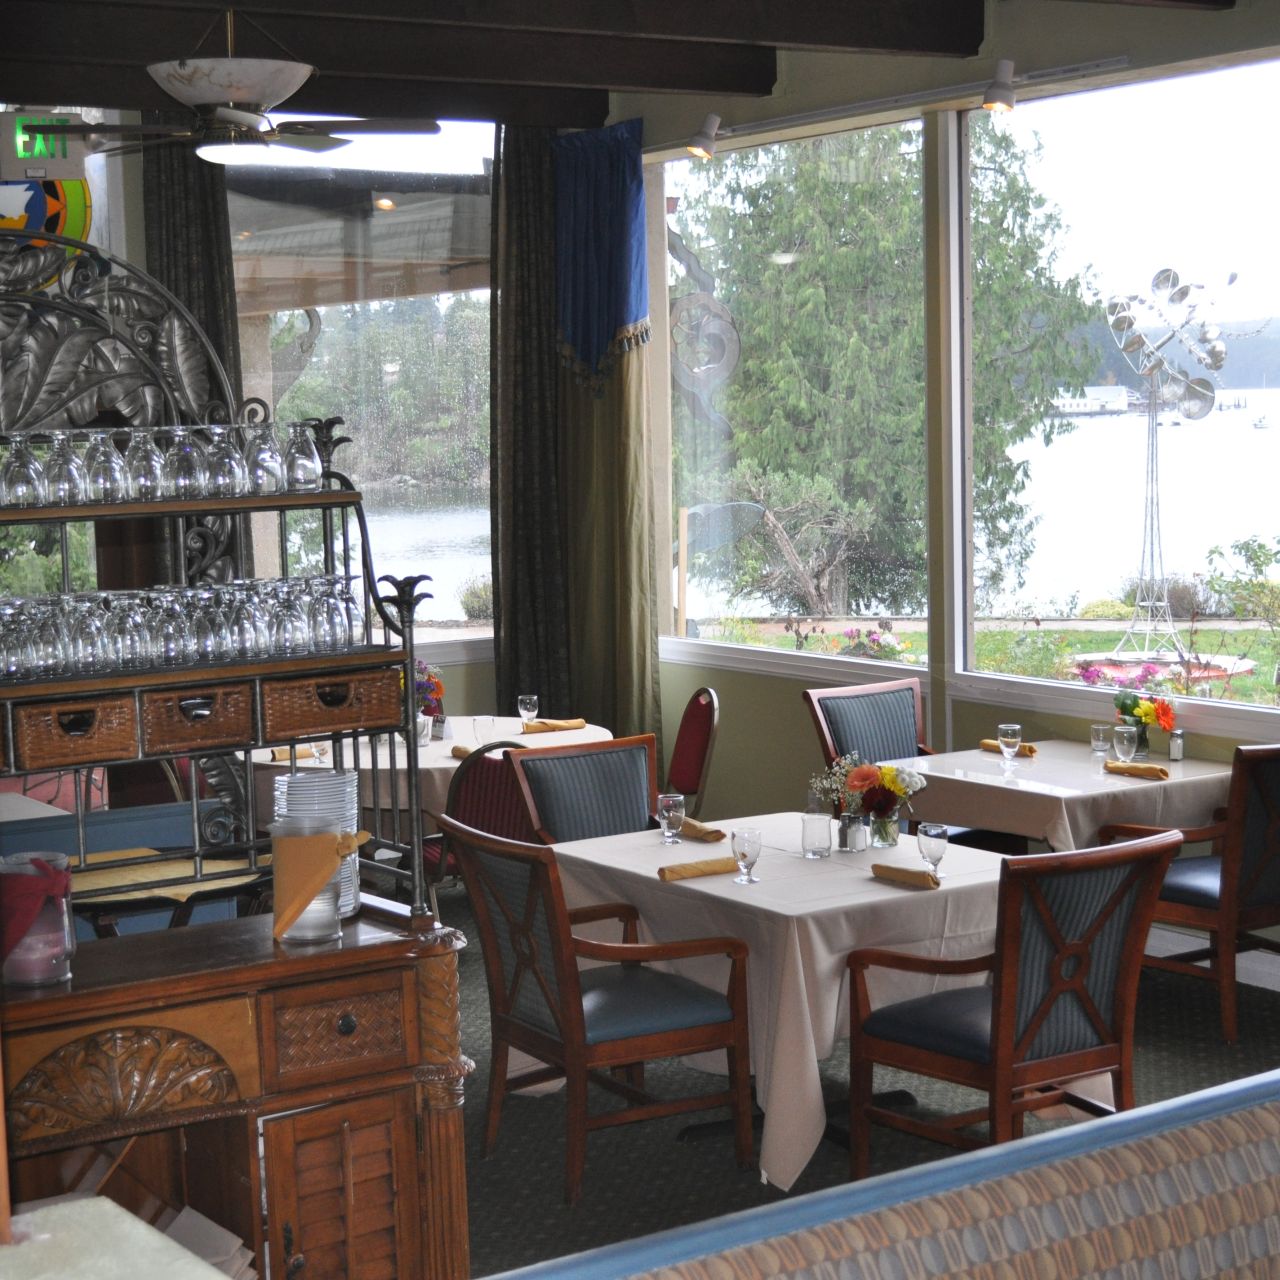 Bar and Grill @ Old Alcohol Plant Restaurant - Port Hadlock, OpenTable